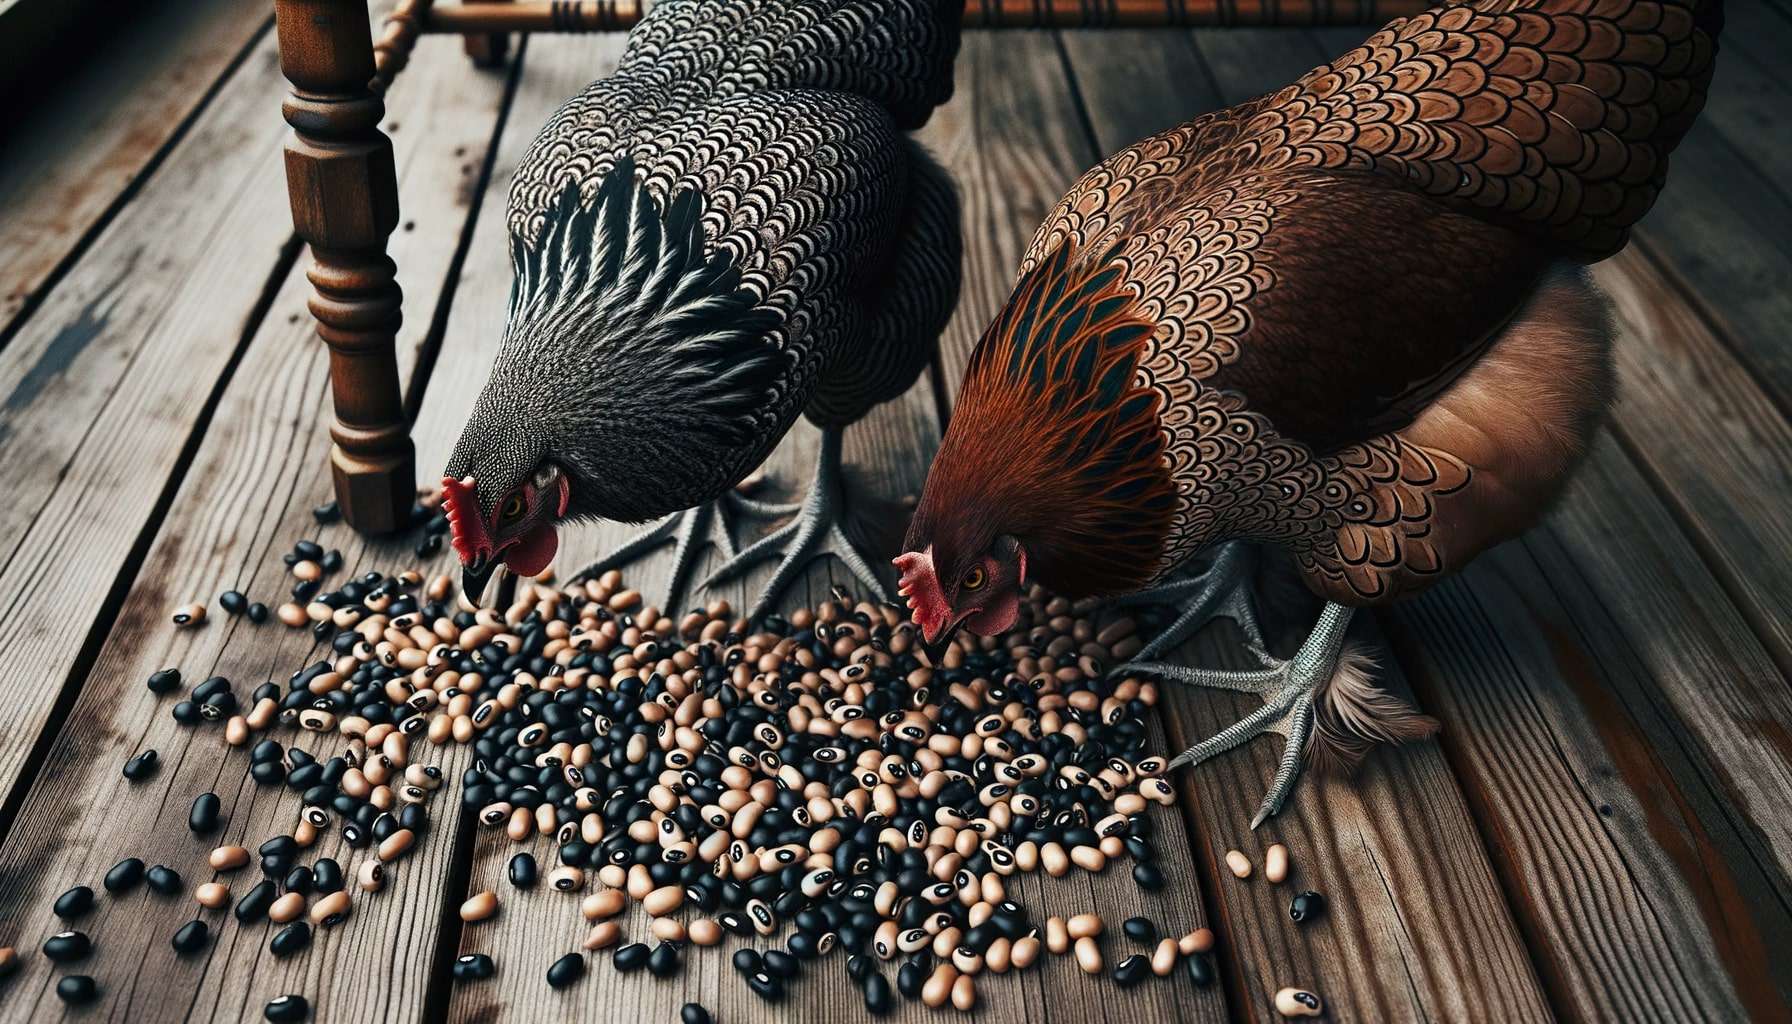 two dark-feathered hens on a wooden deck pecking at Black-Eyed Peas.